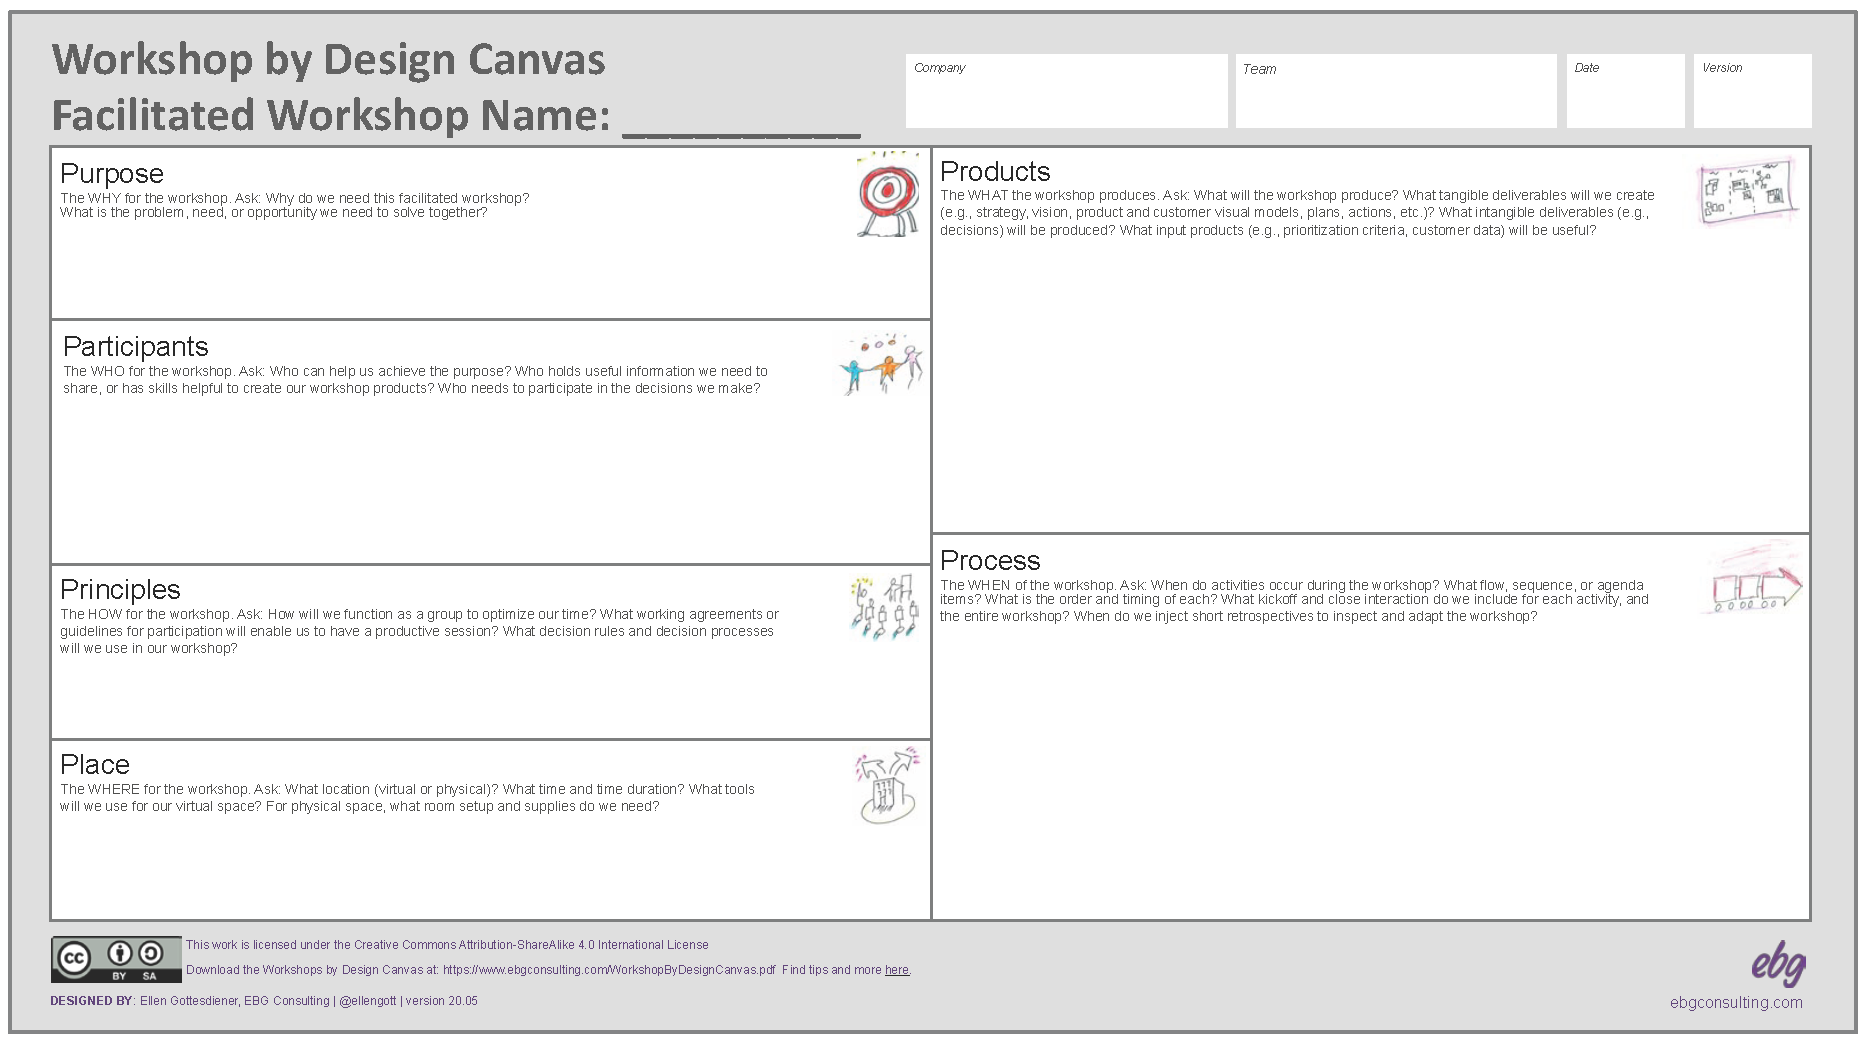 Source: EBG Consulting | Workshop by Design Canvas | Download the Workshop by Design Canvas